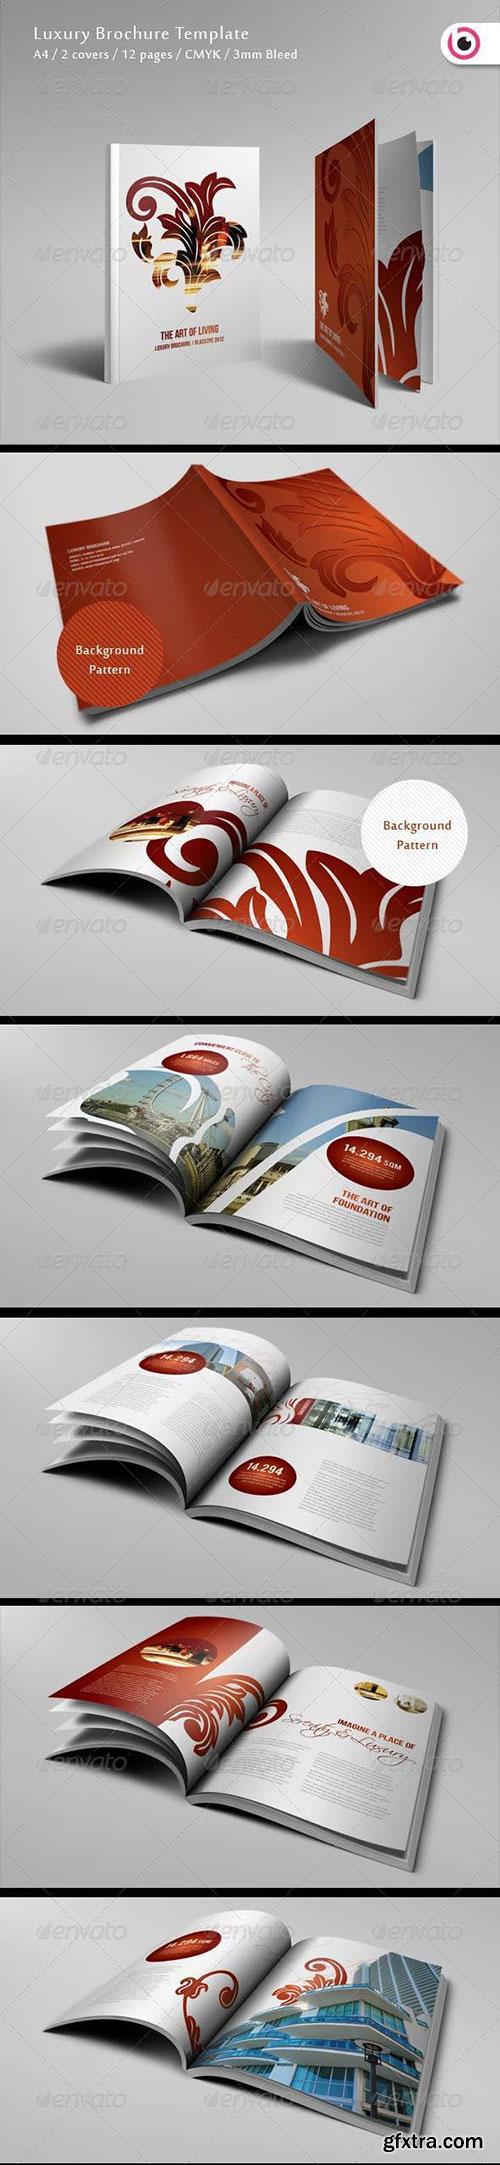 GraphicRiver - Luxury Brochure Template 12 Pages